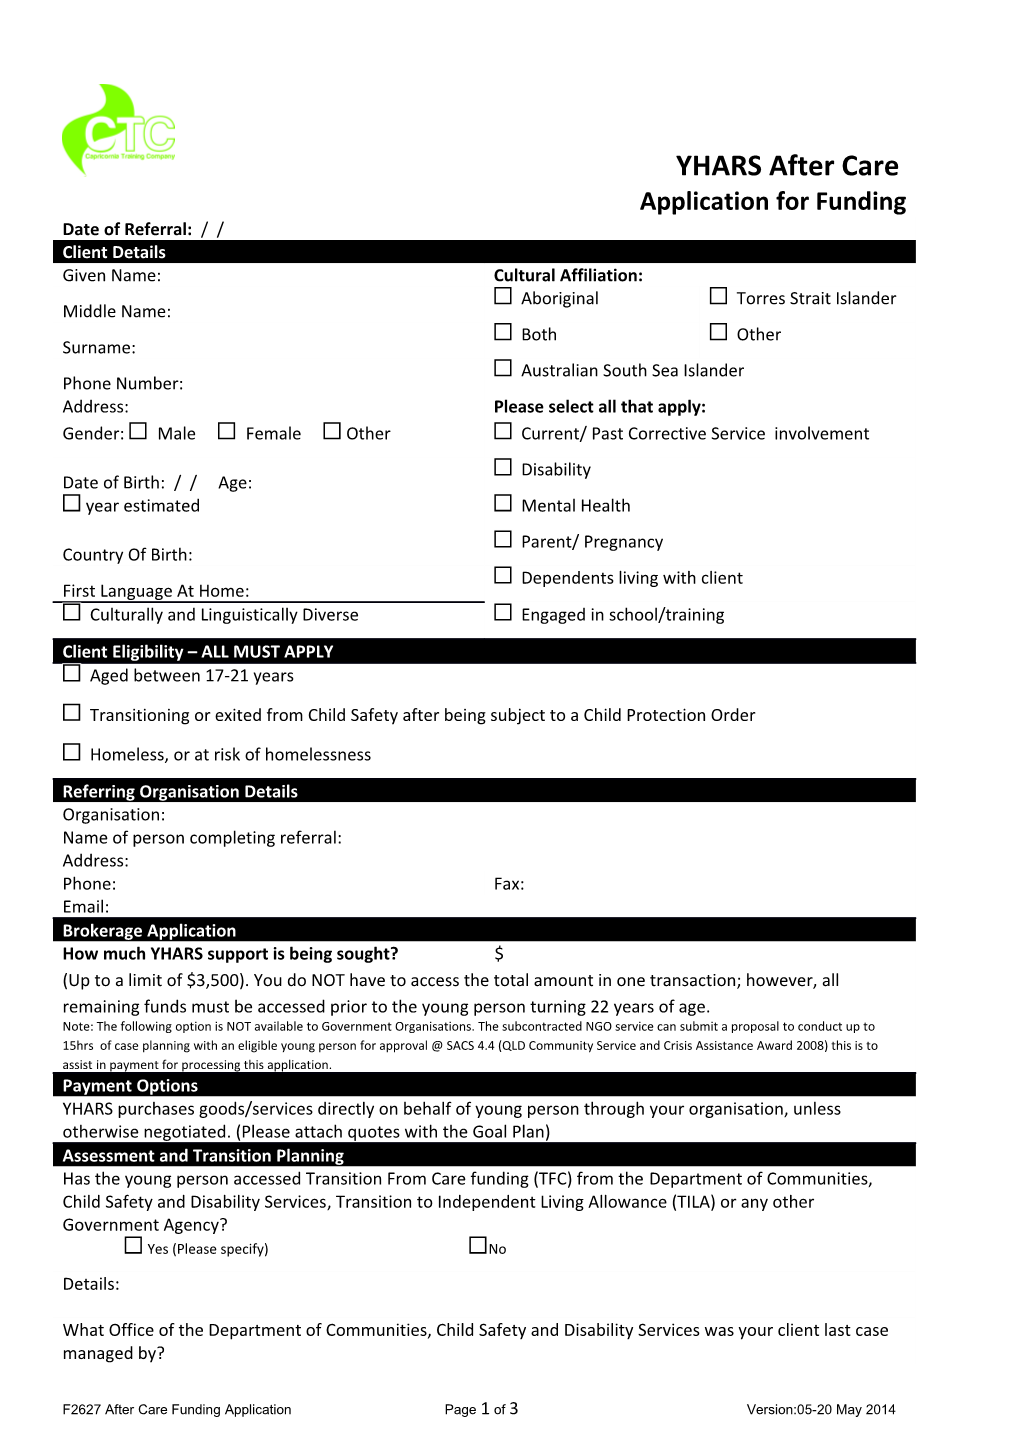 After Care Funding Application Form